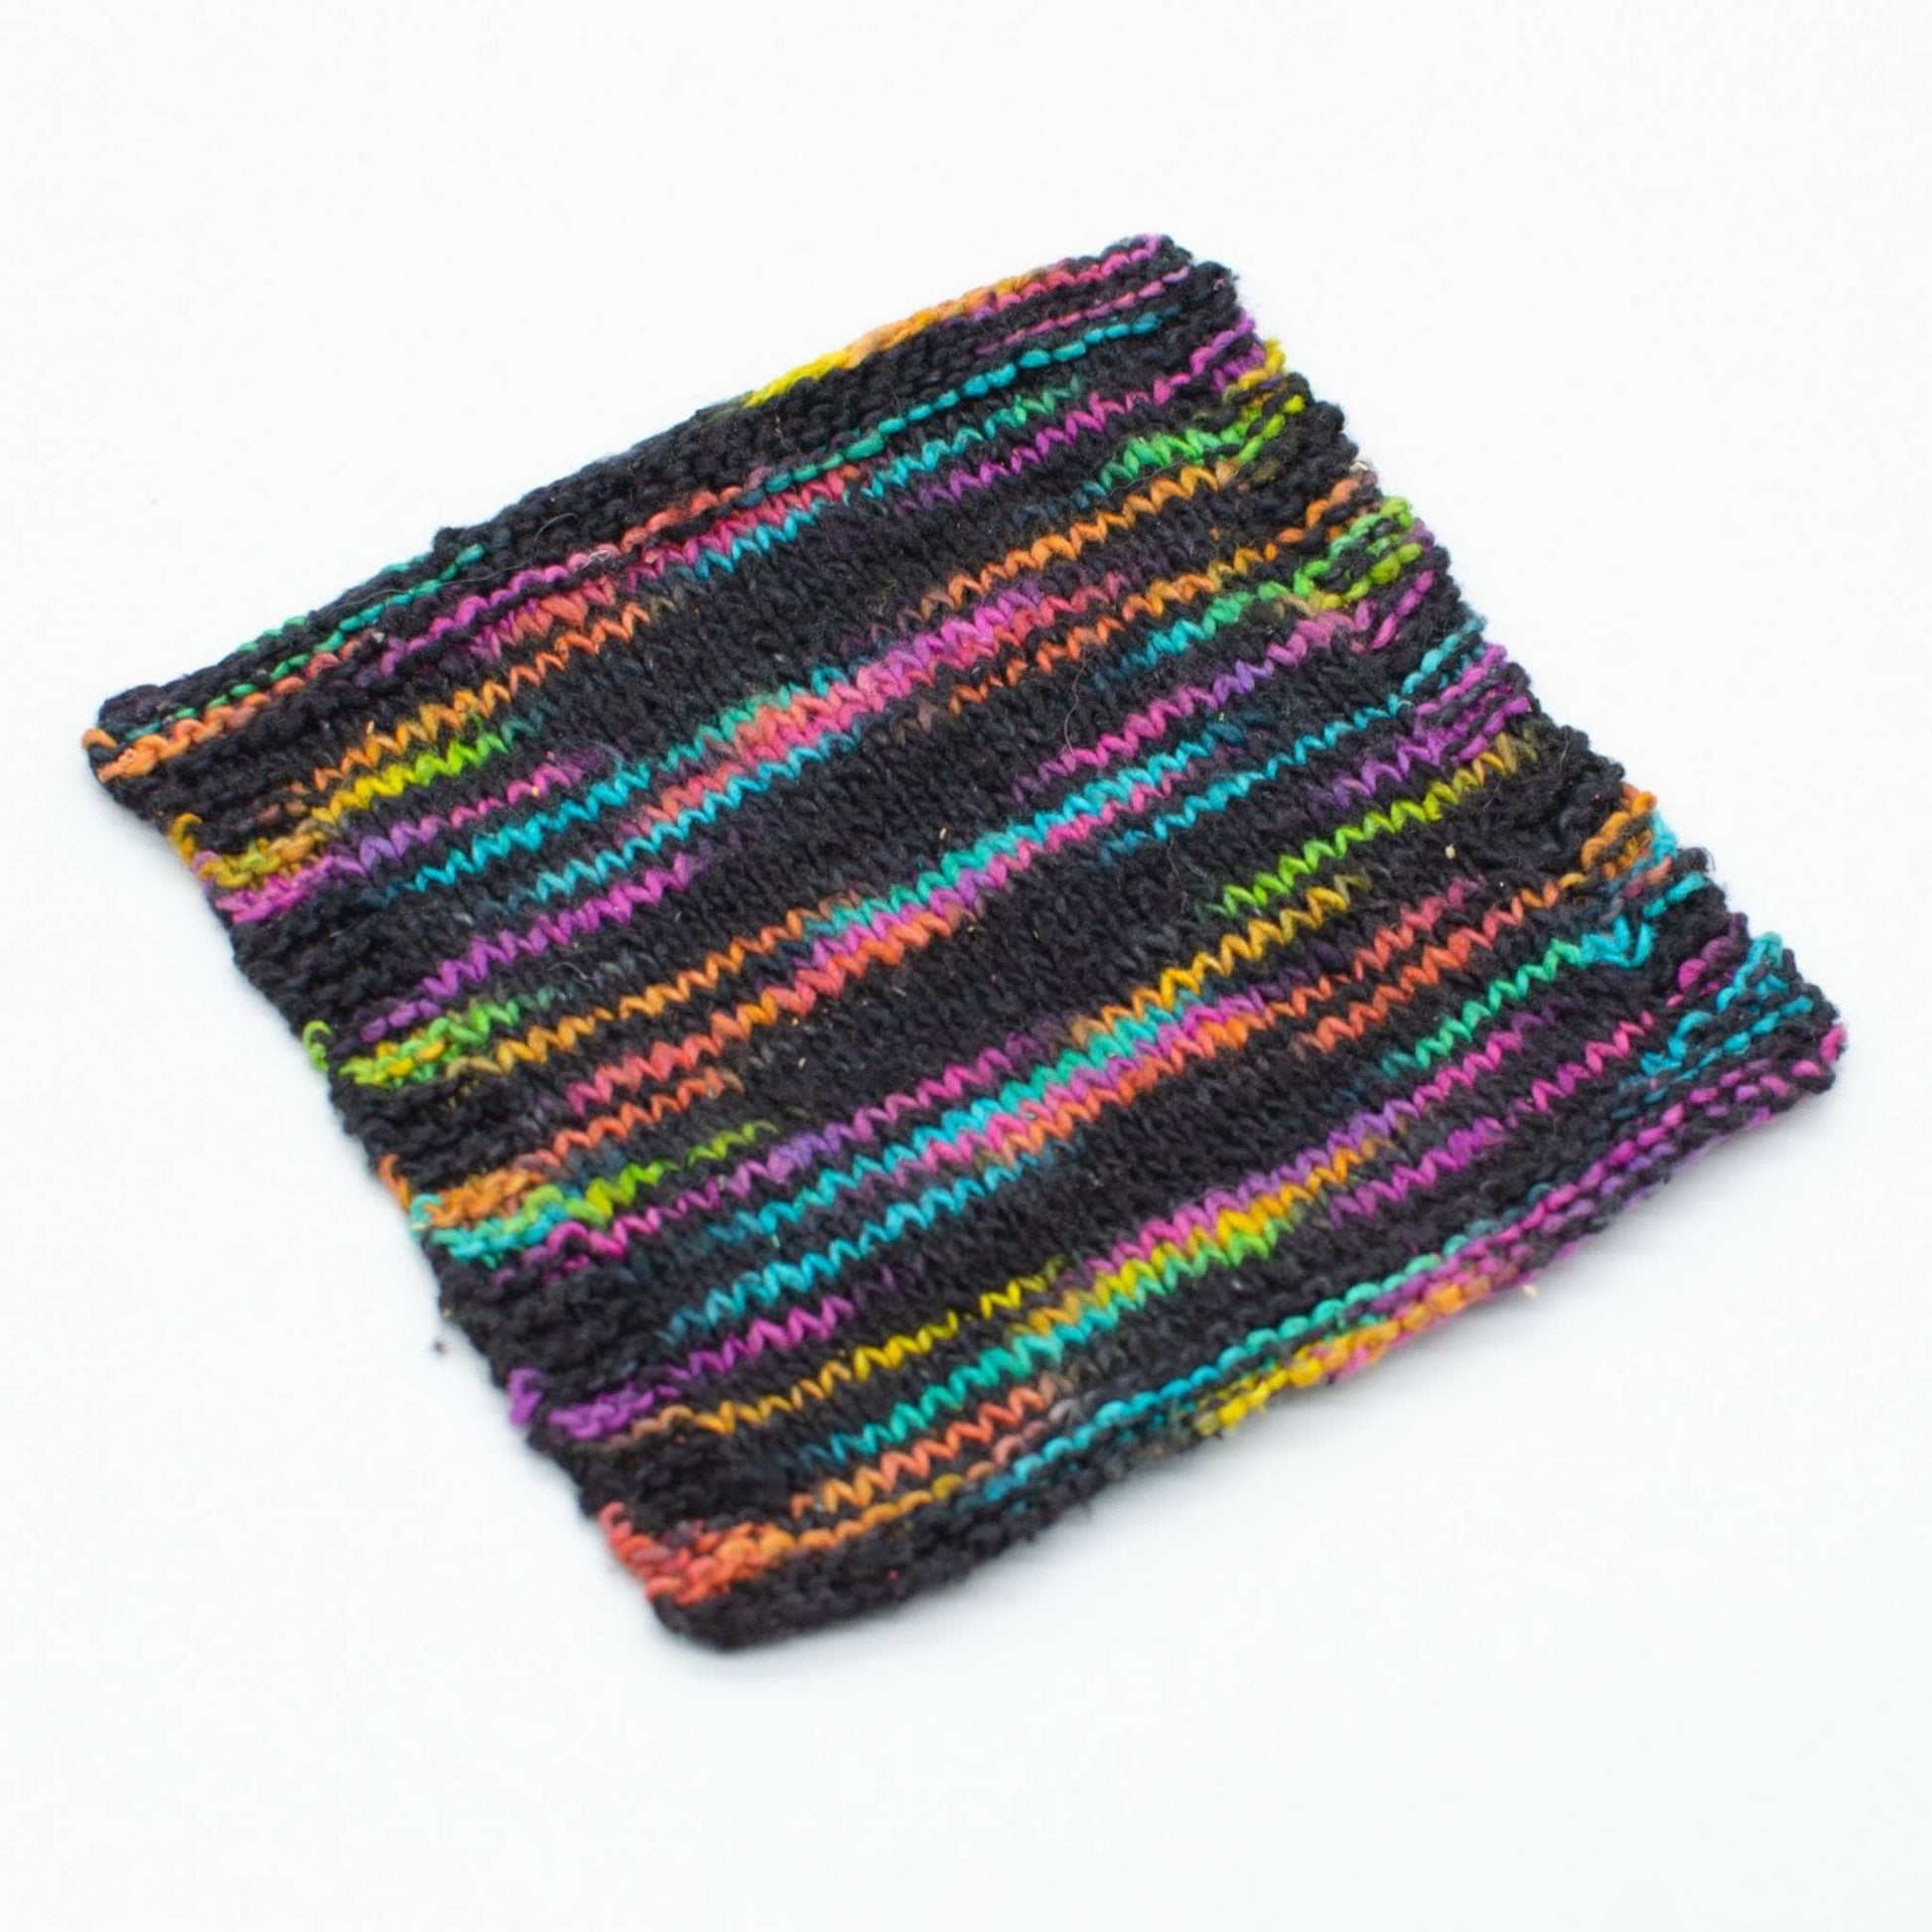 knit swatch of sunset lover peek a boo lace weight silk yarn (black and rainbow)